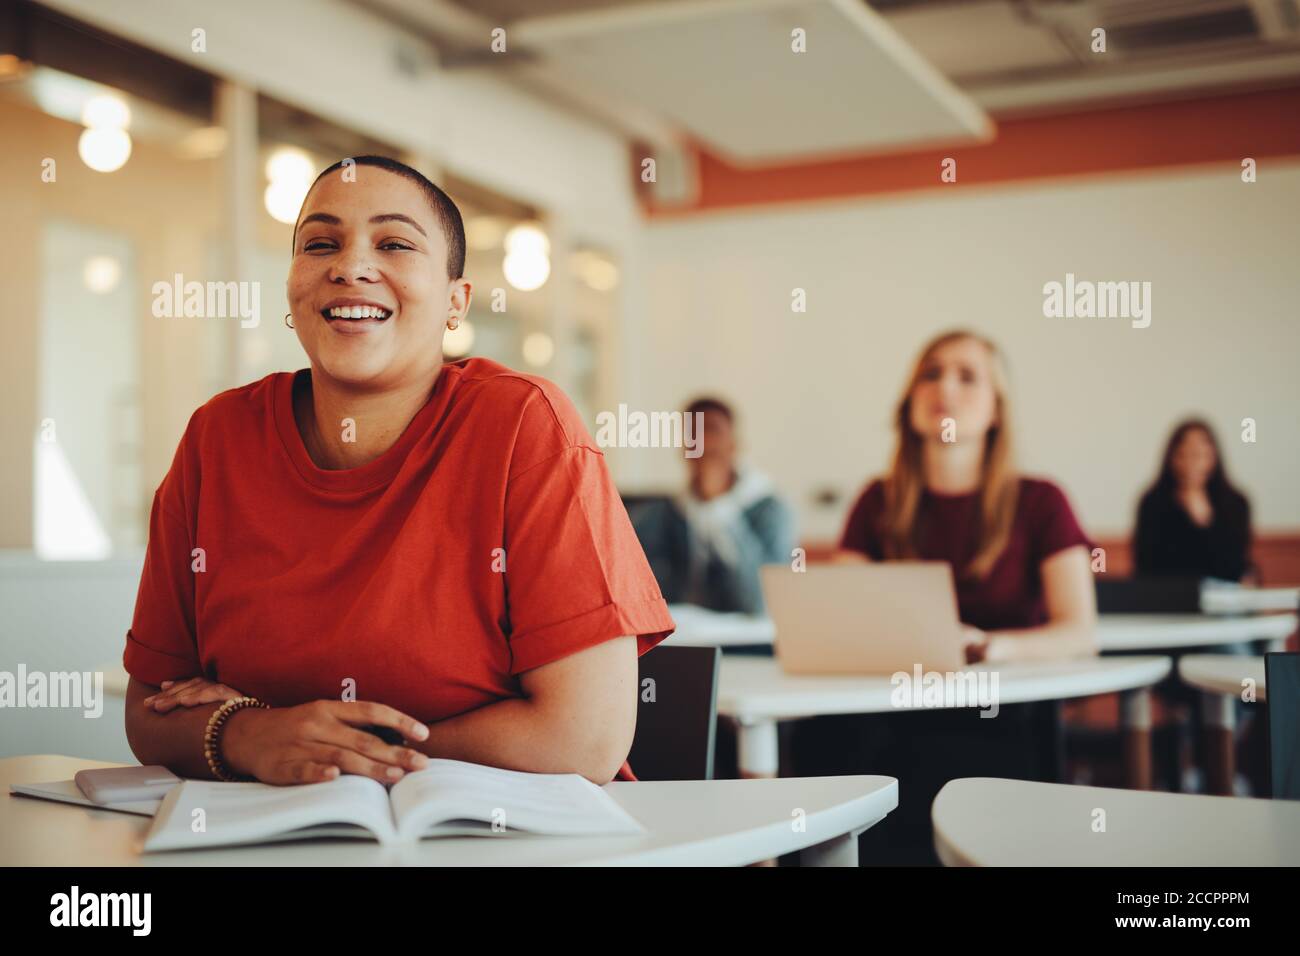 Female student sitting in university classroom and smiling. Woman paying attention in the class. Stock Photo